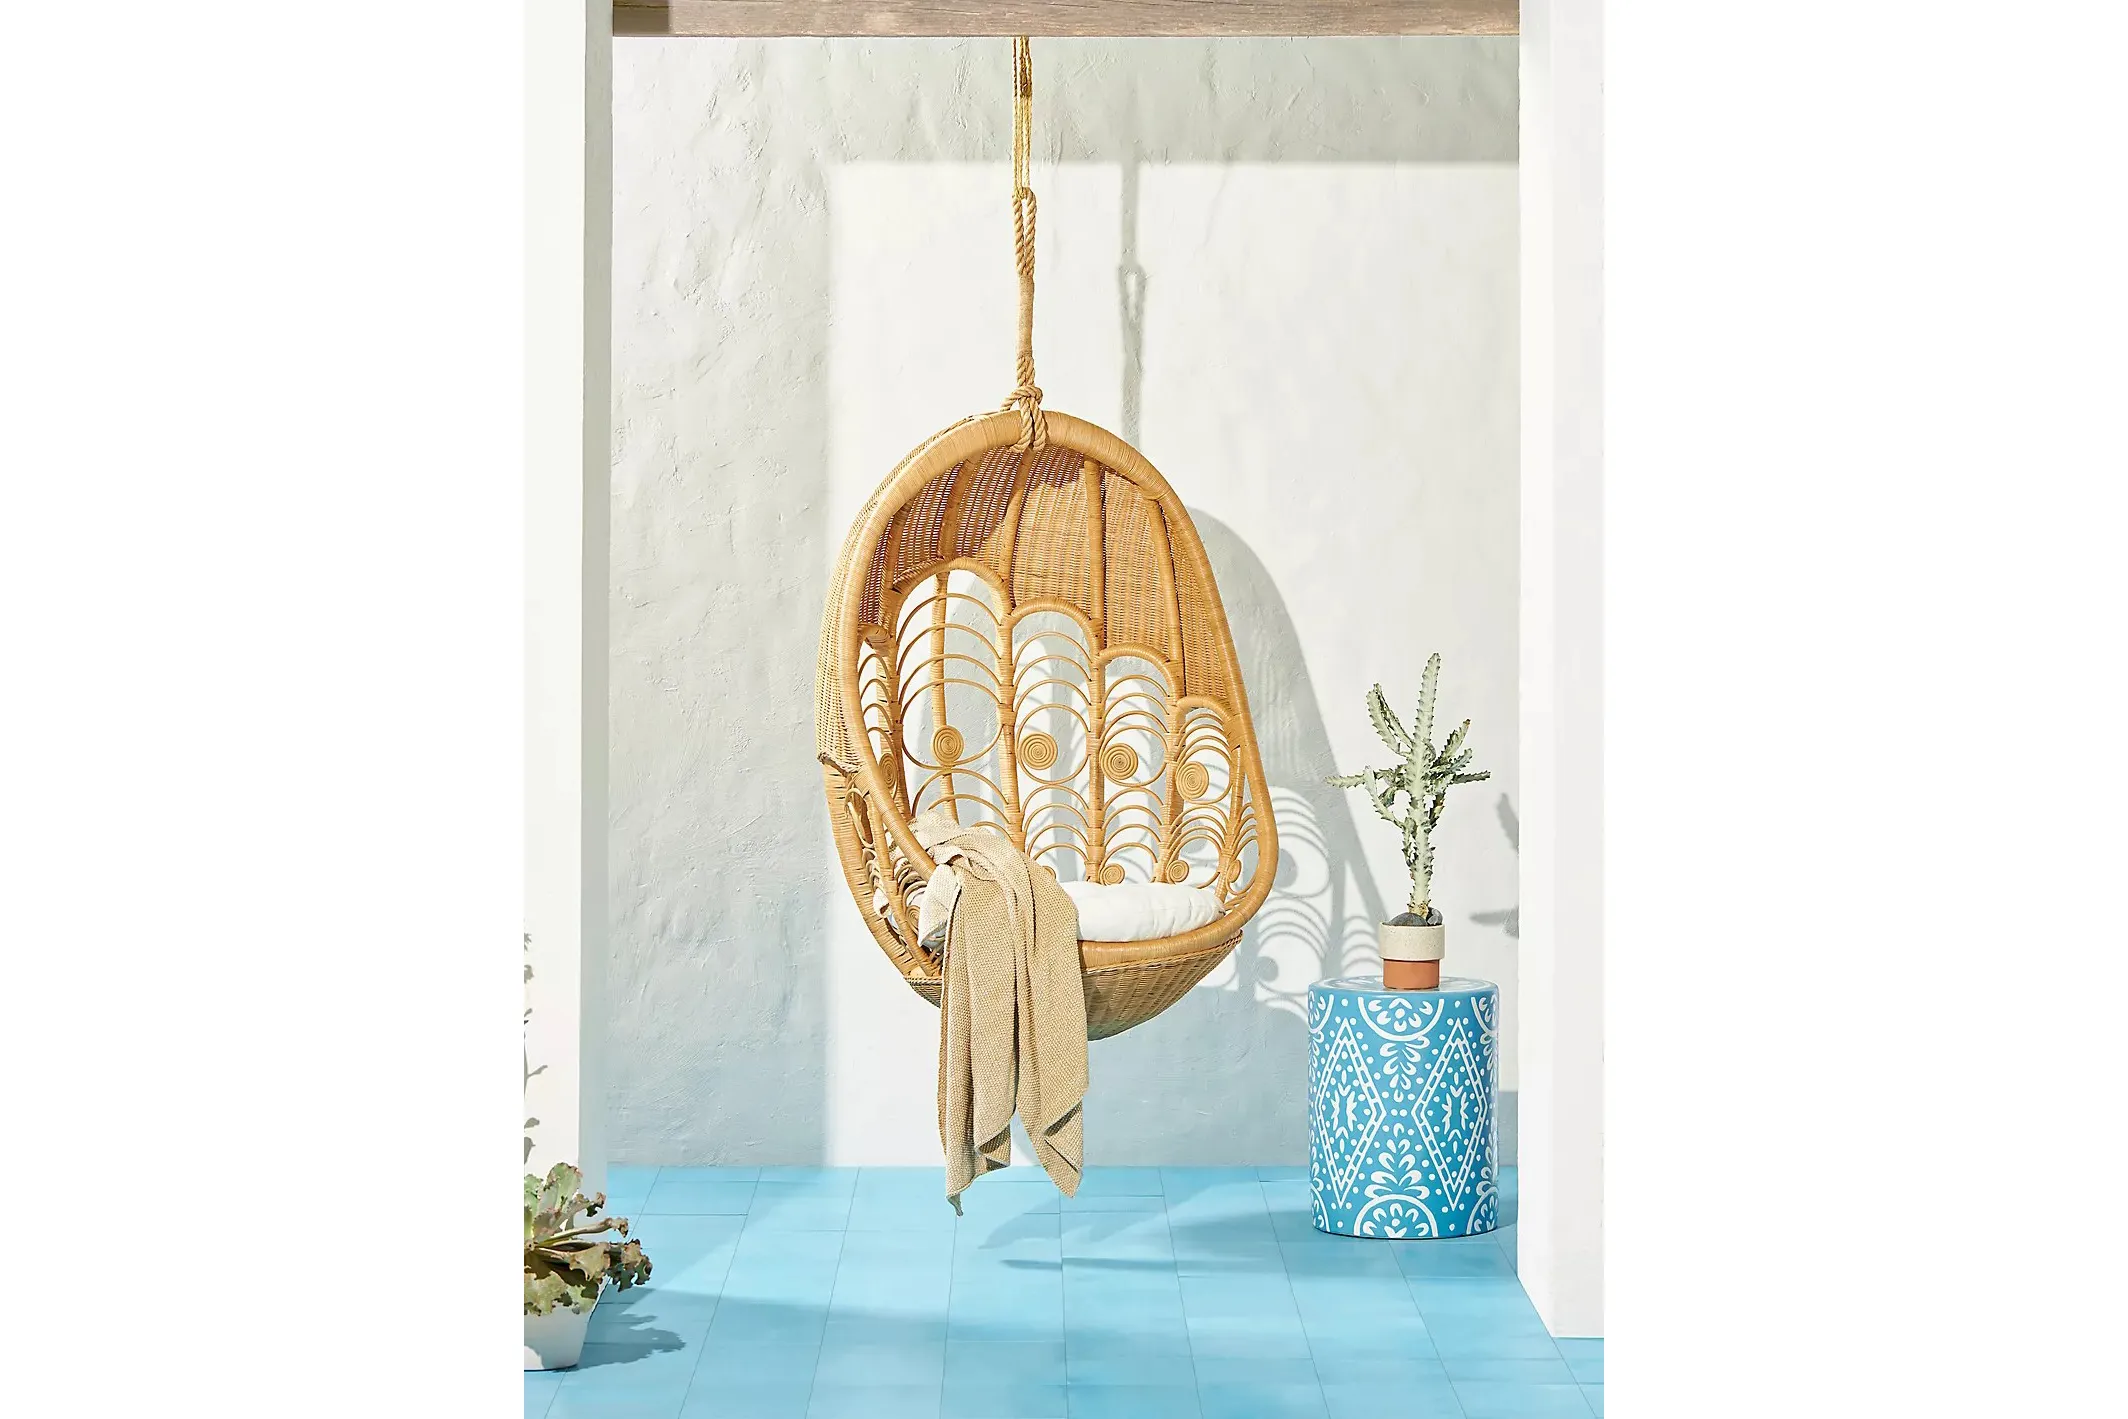 Cocoon Chairs - The Key Benefits Of Hanging Swing Chair